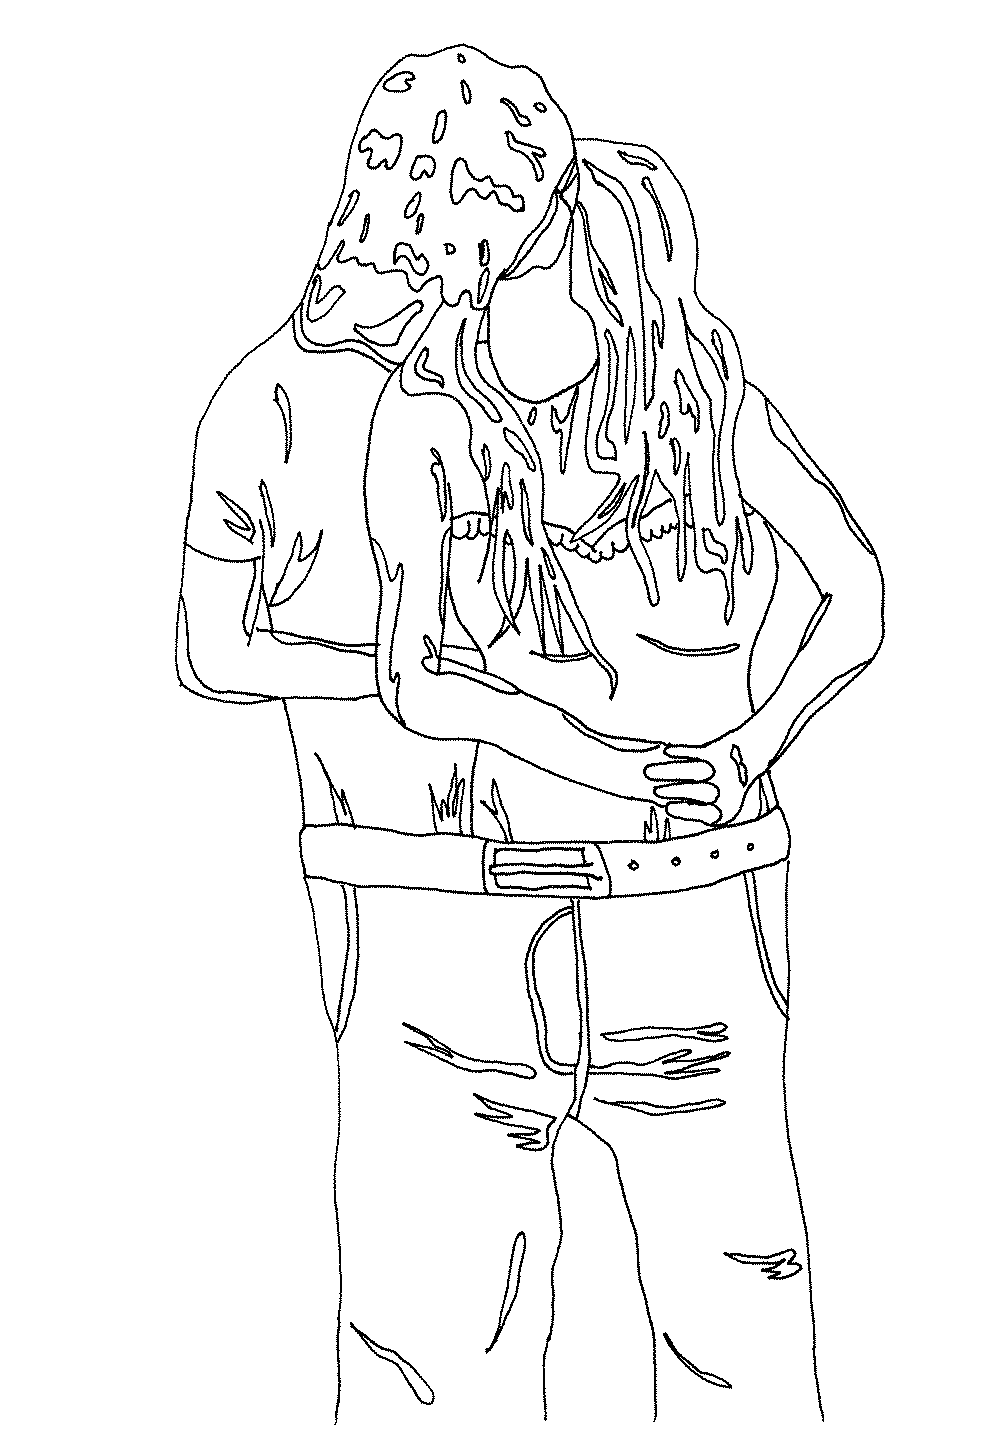 drawing_untitled-18